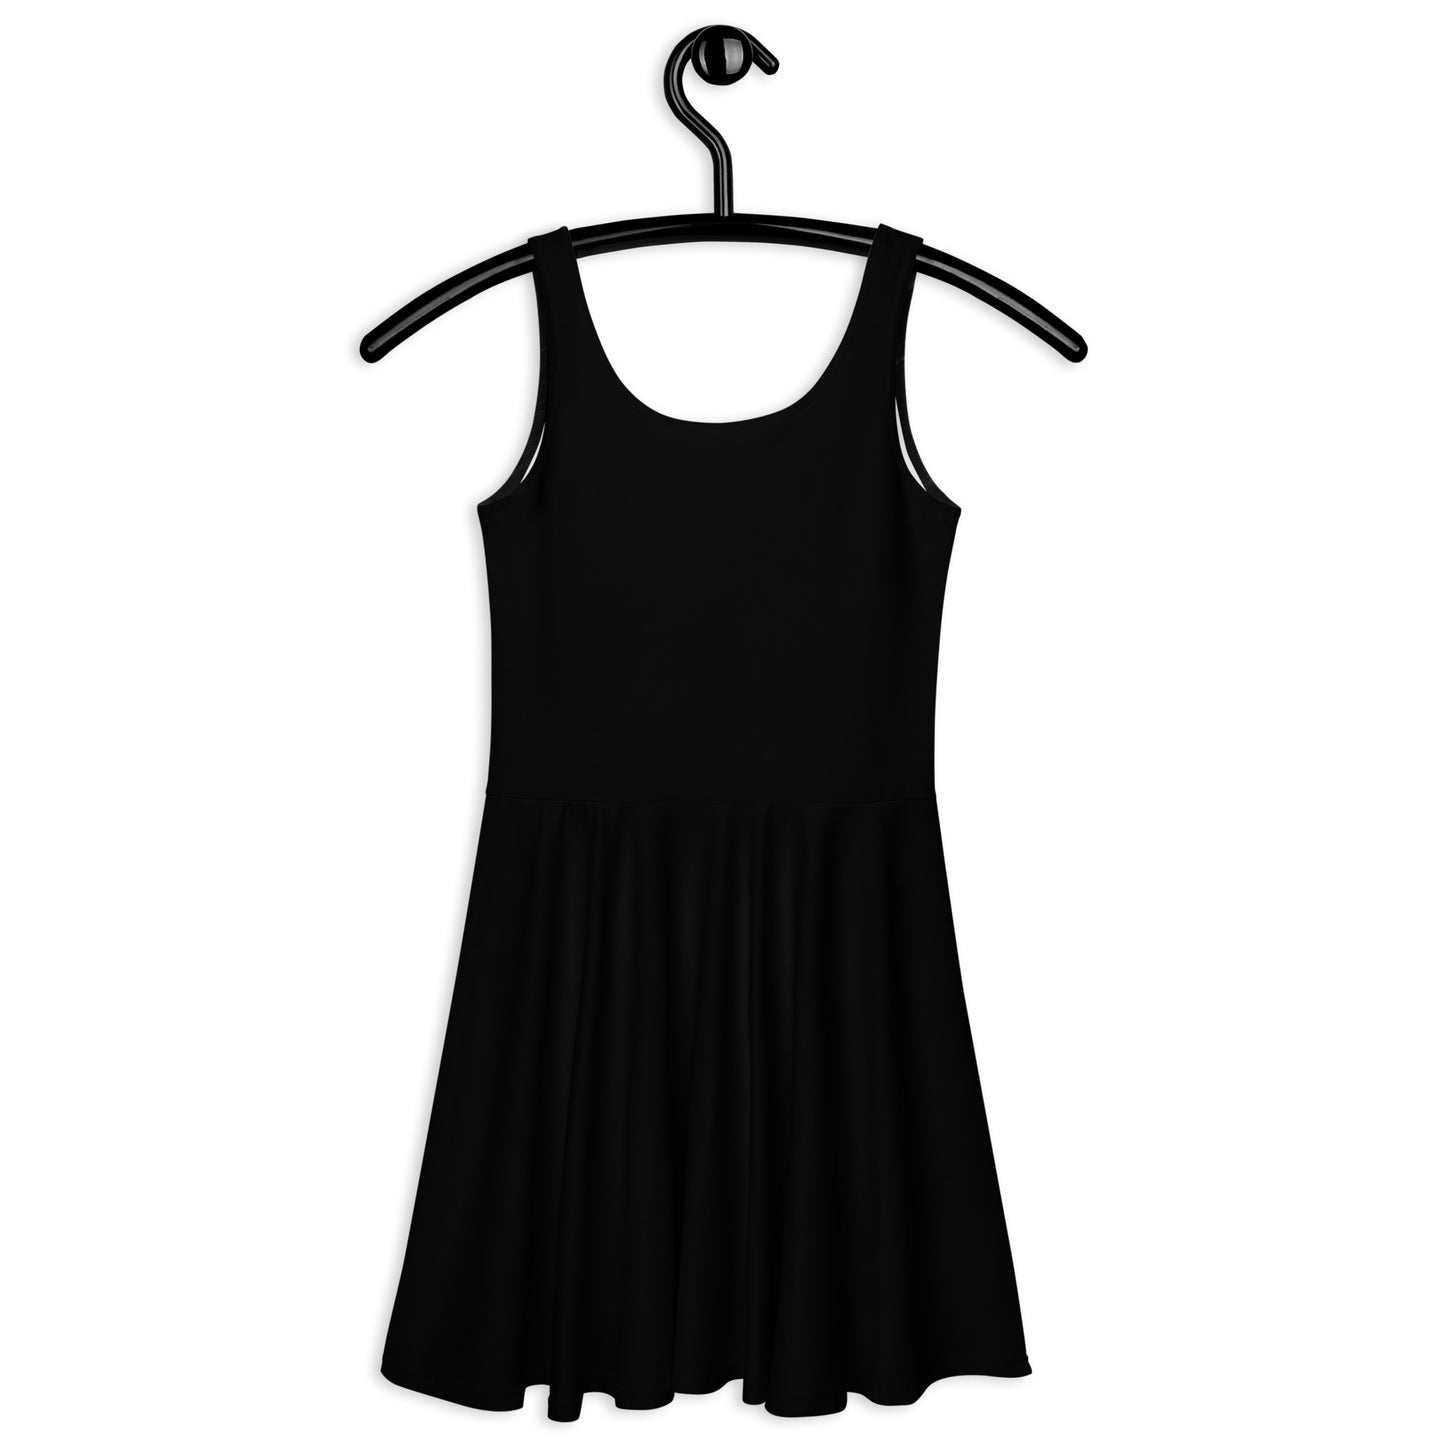 Cotton Tee Dress Mini, Breathable Thick and Soft Woven Cotton, Cozy Layering Dream Skater Dress